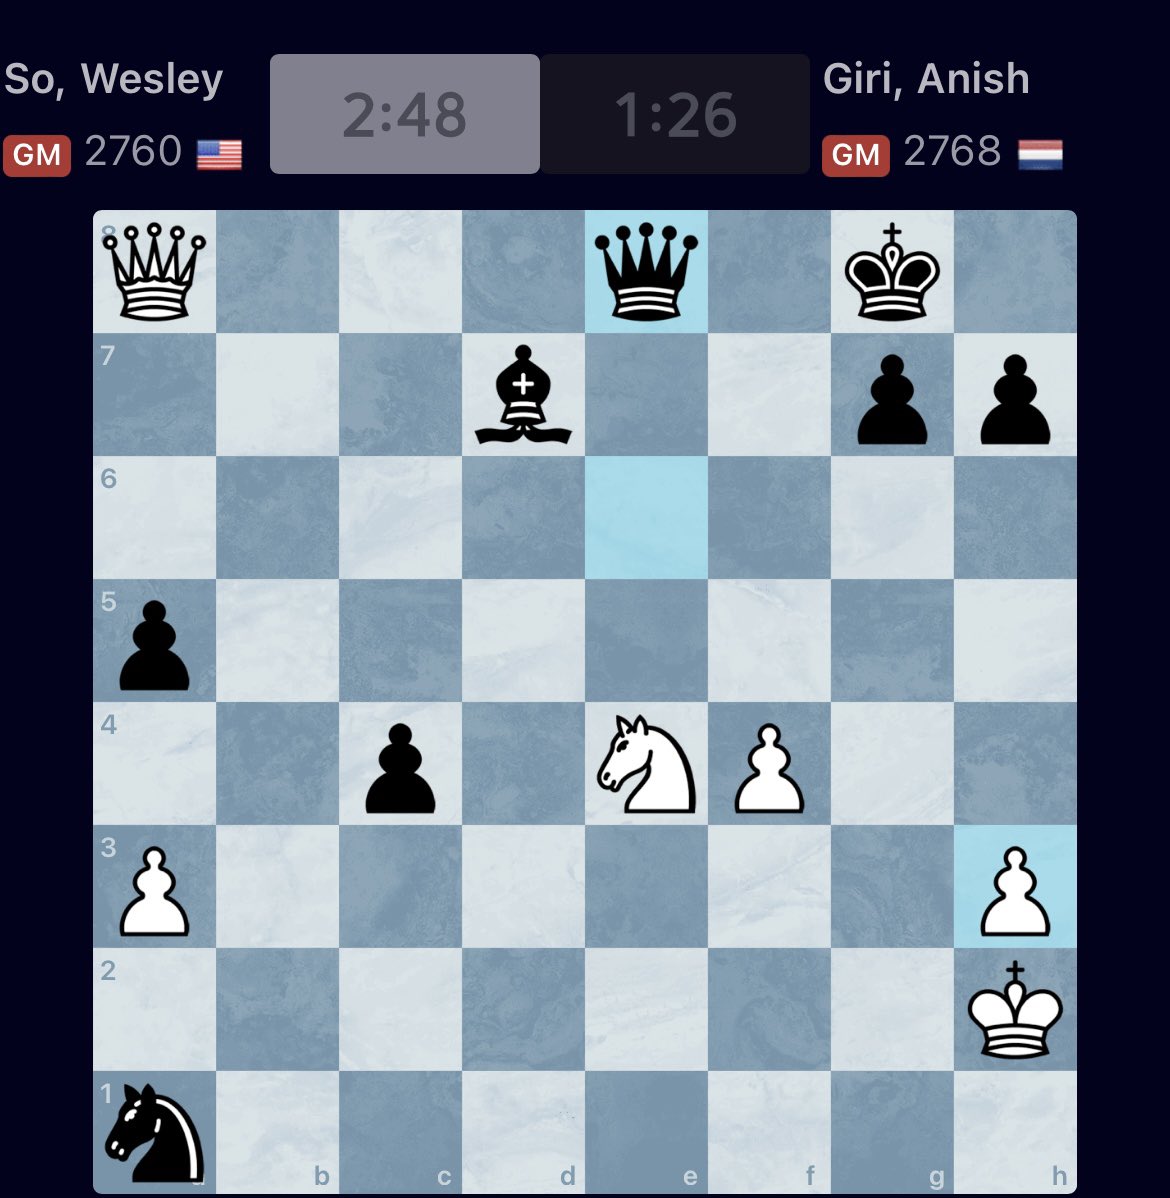 Chess Openings Online - Chessable